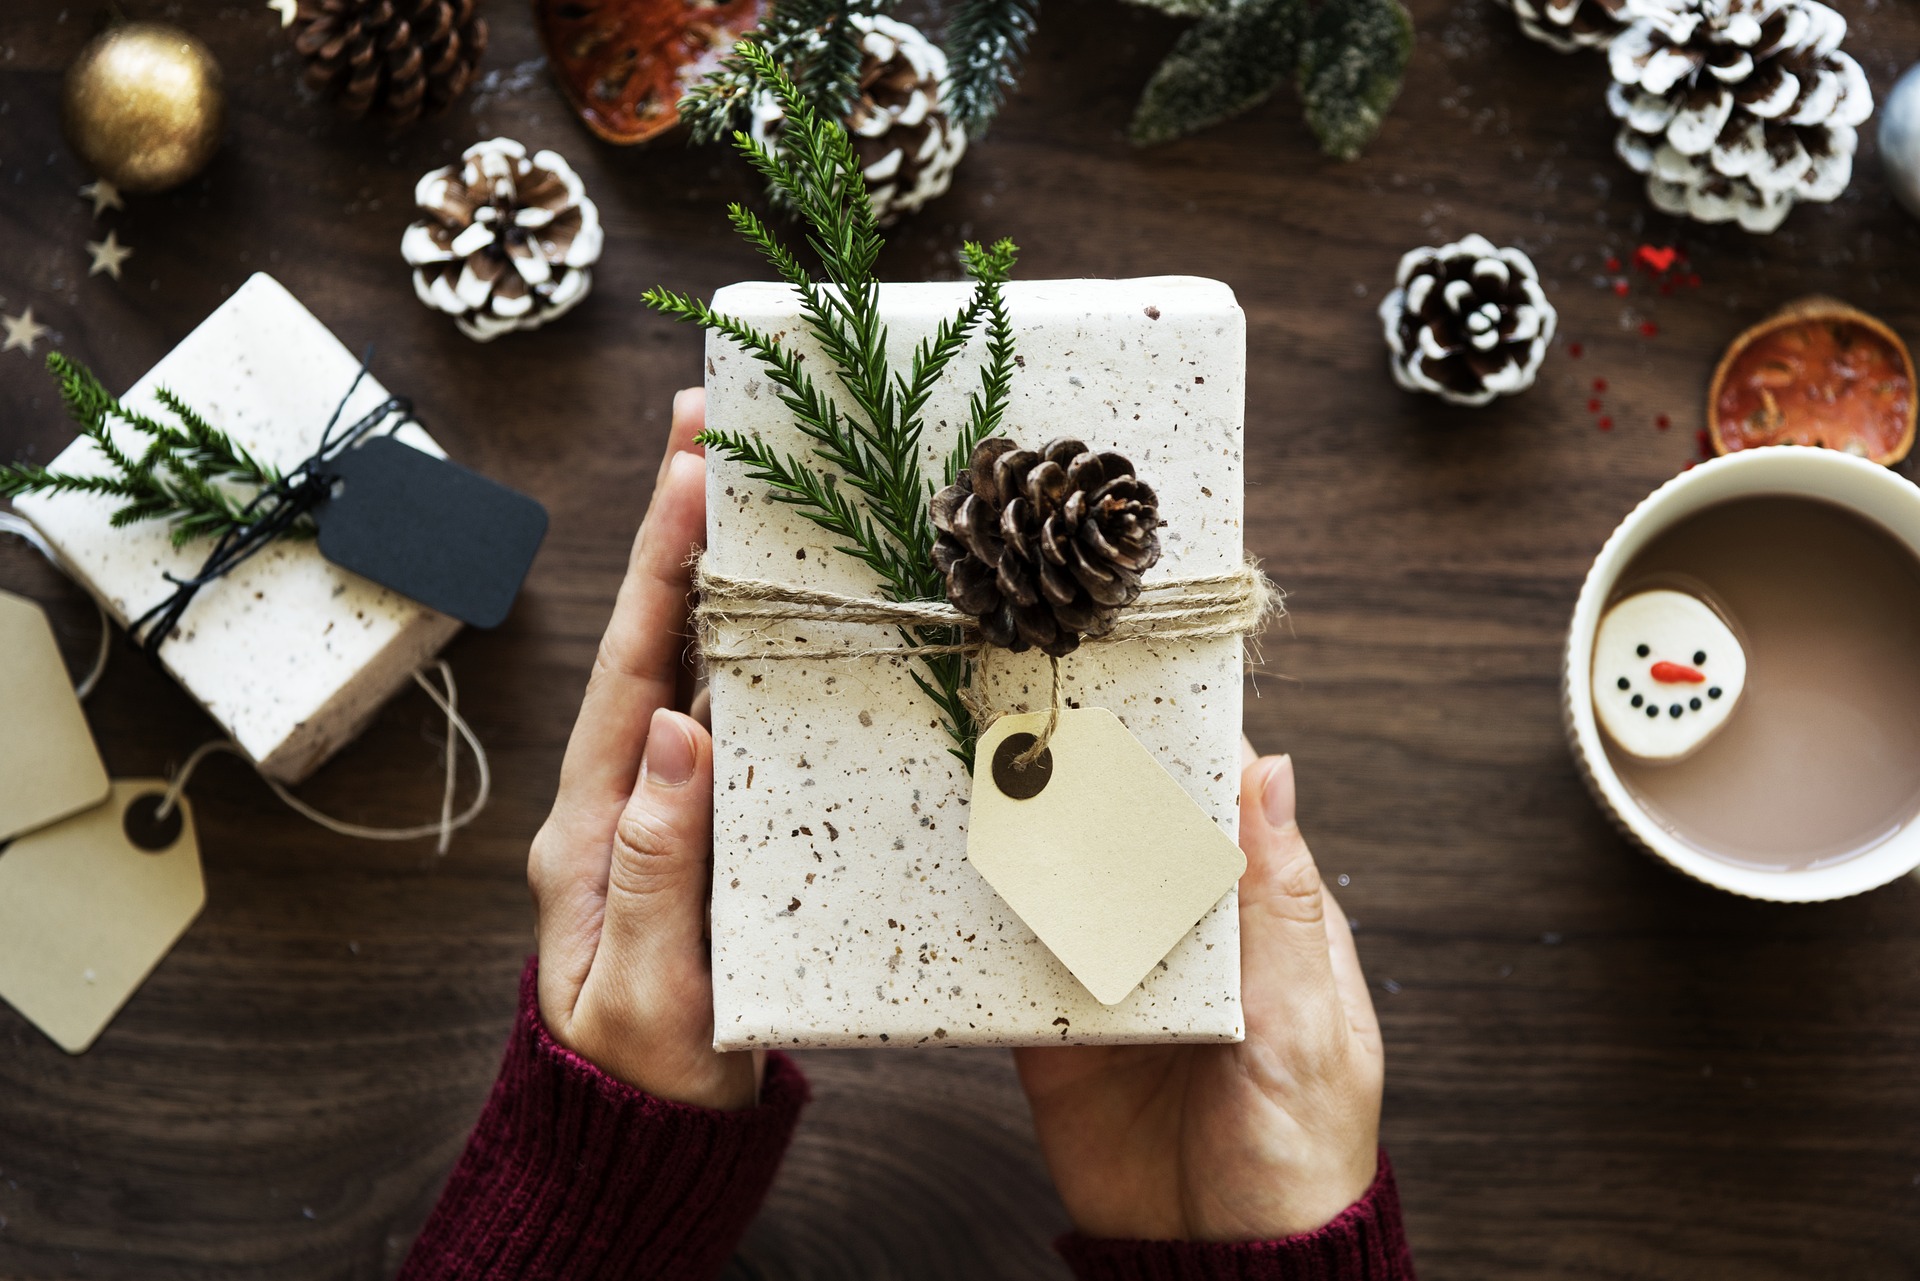 75+ Gift Ideas For Everyone On Your Holiday List